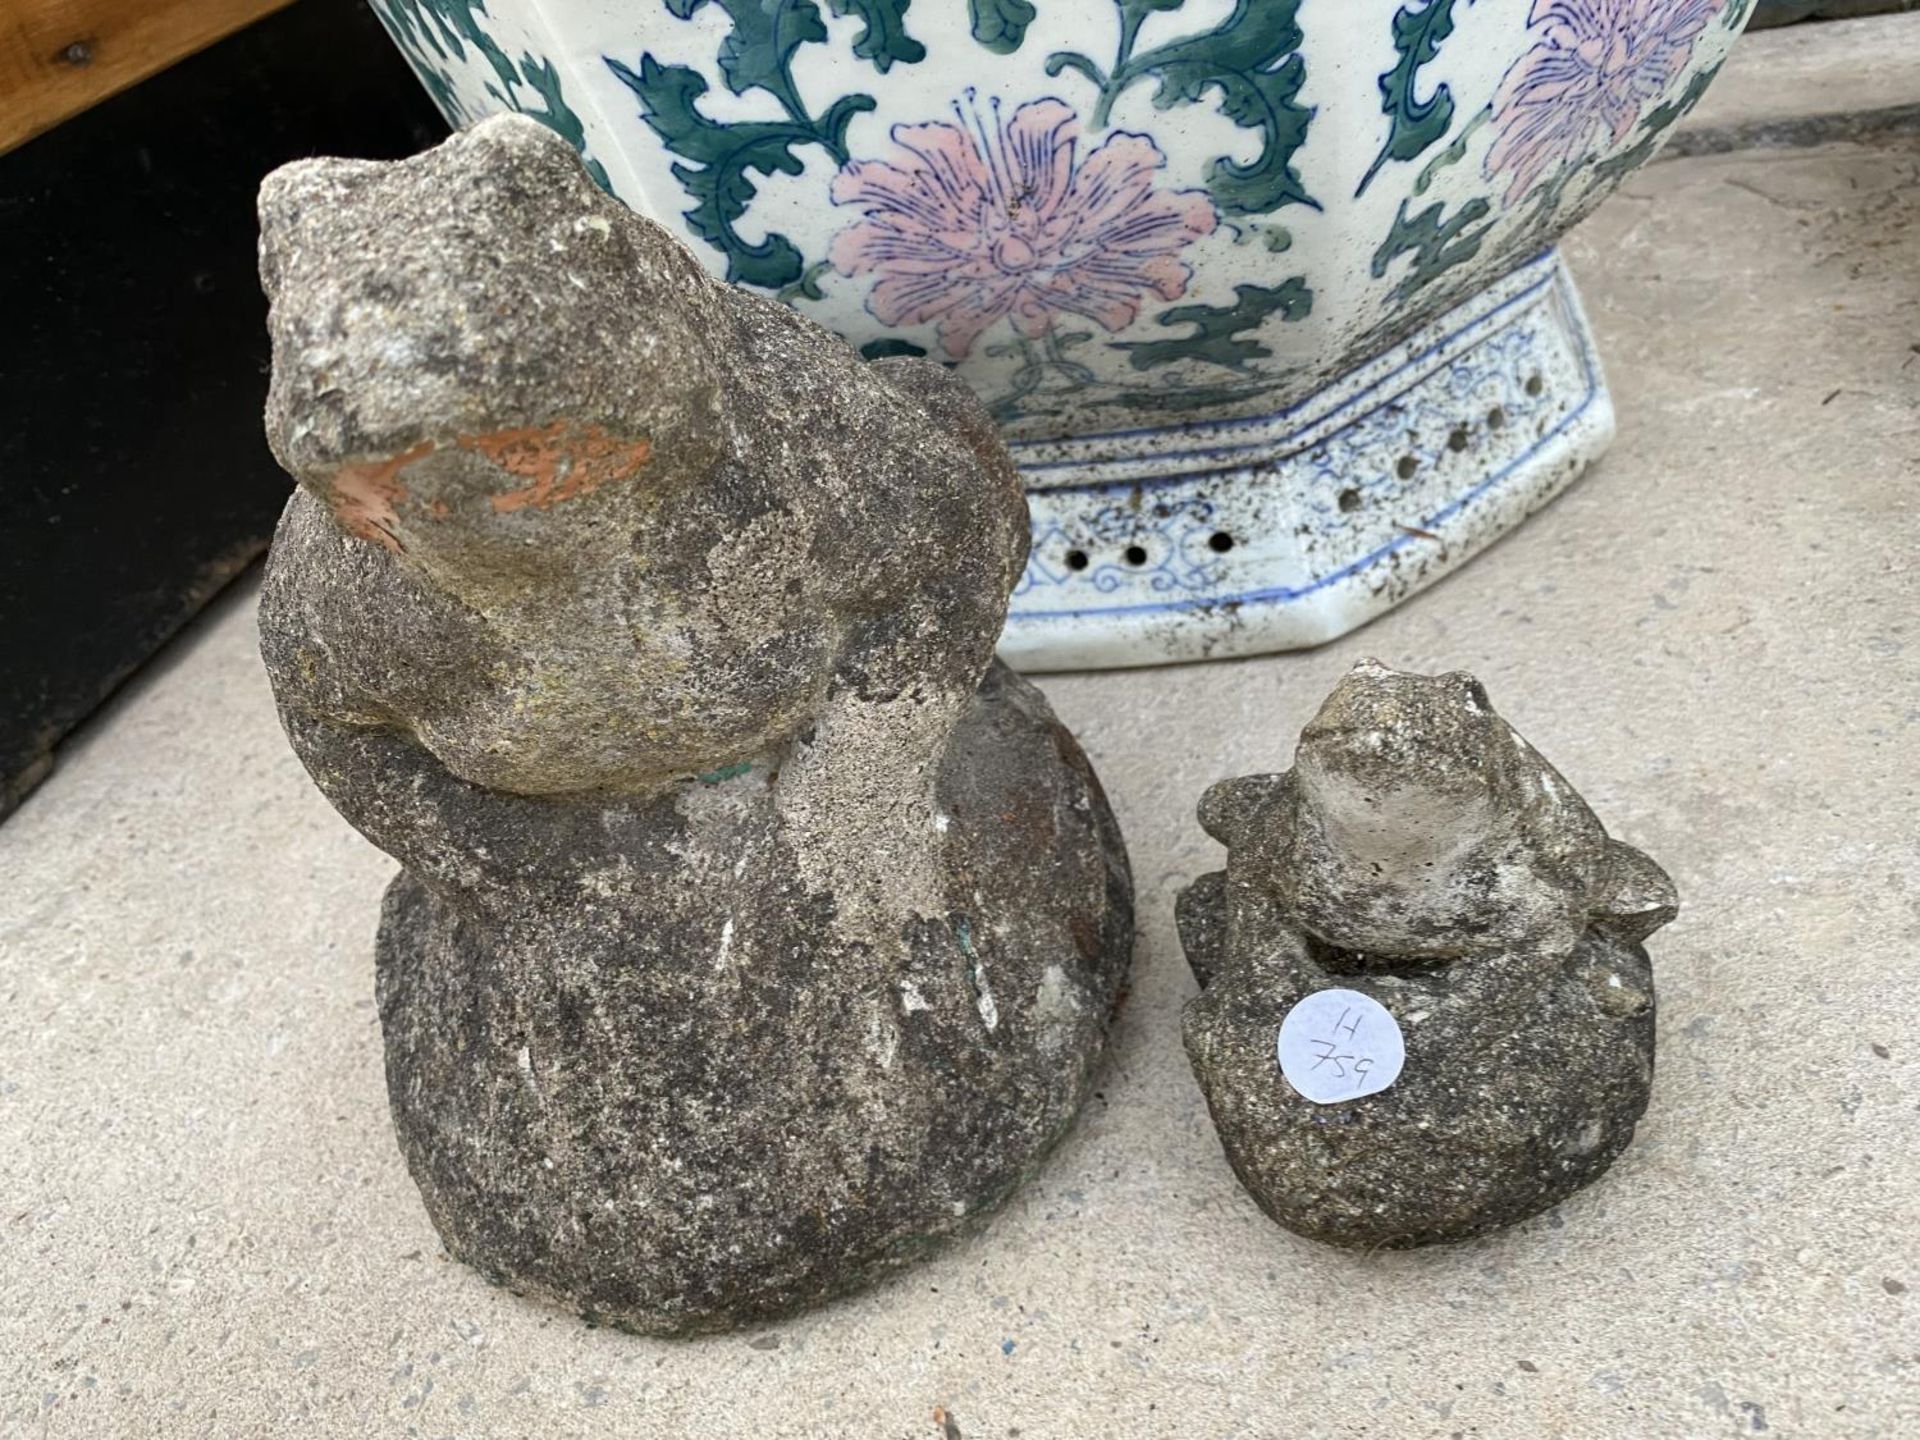 A DECORATIVE OCTAGONAL CERAMIC PLANTER AND TWO RECONSTITUTED STONE FROG GARDEN ORNAMENTS - Image 2 of 3